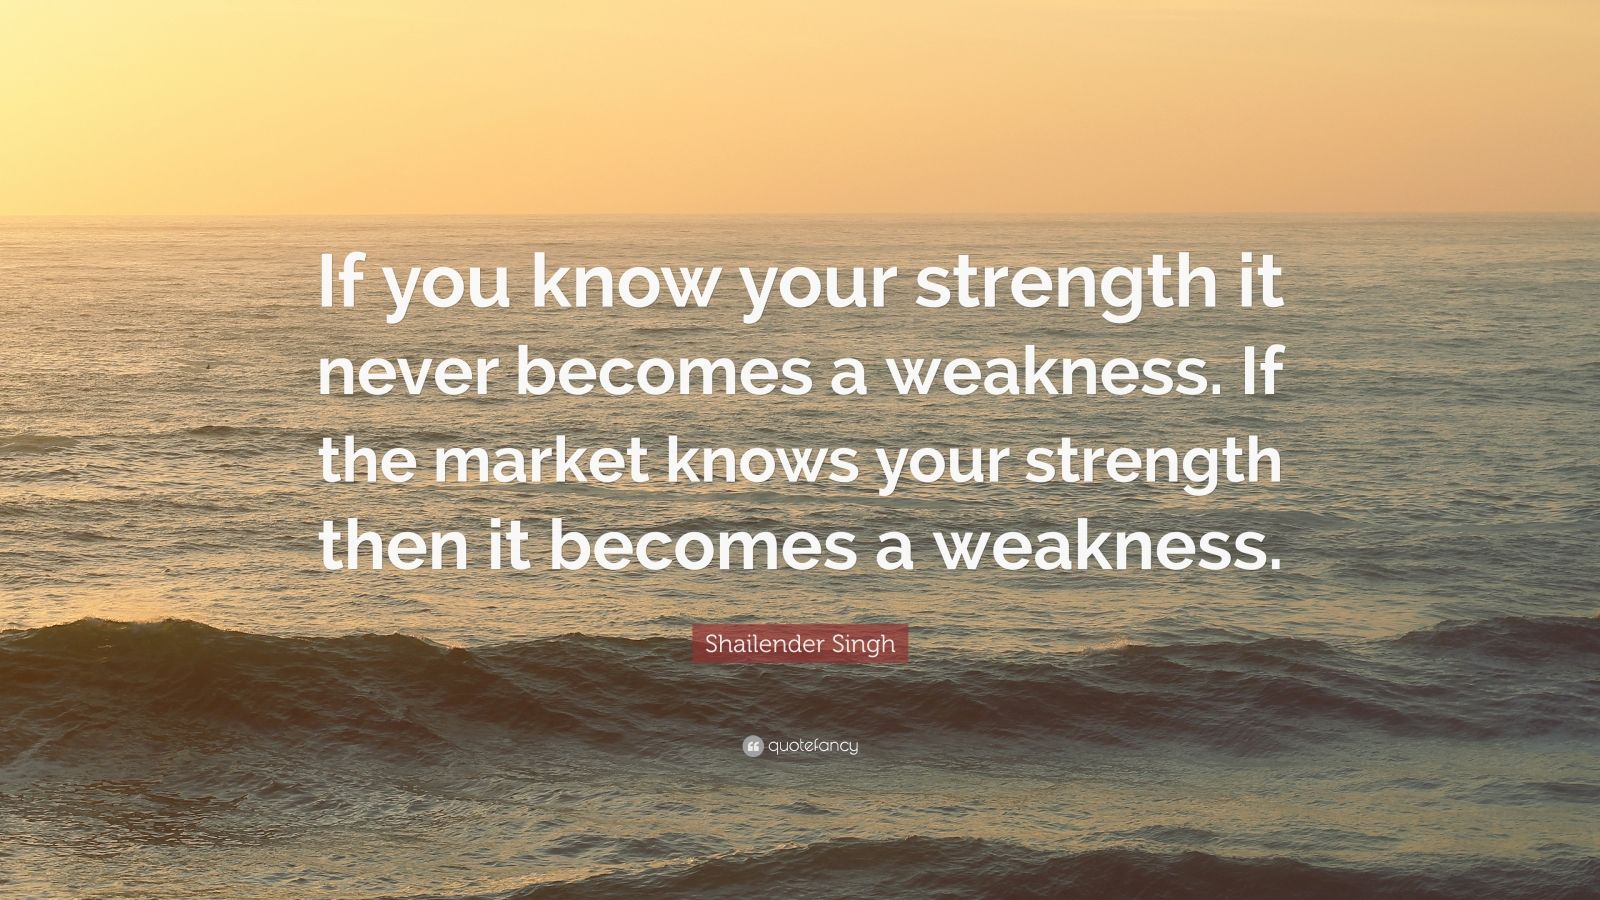 Shailender Singh Quote “if You Know Your Strength It Never Becomes A Weakness If The Market 7415